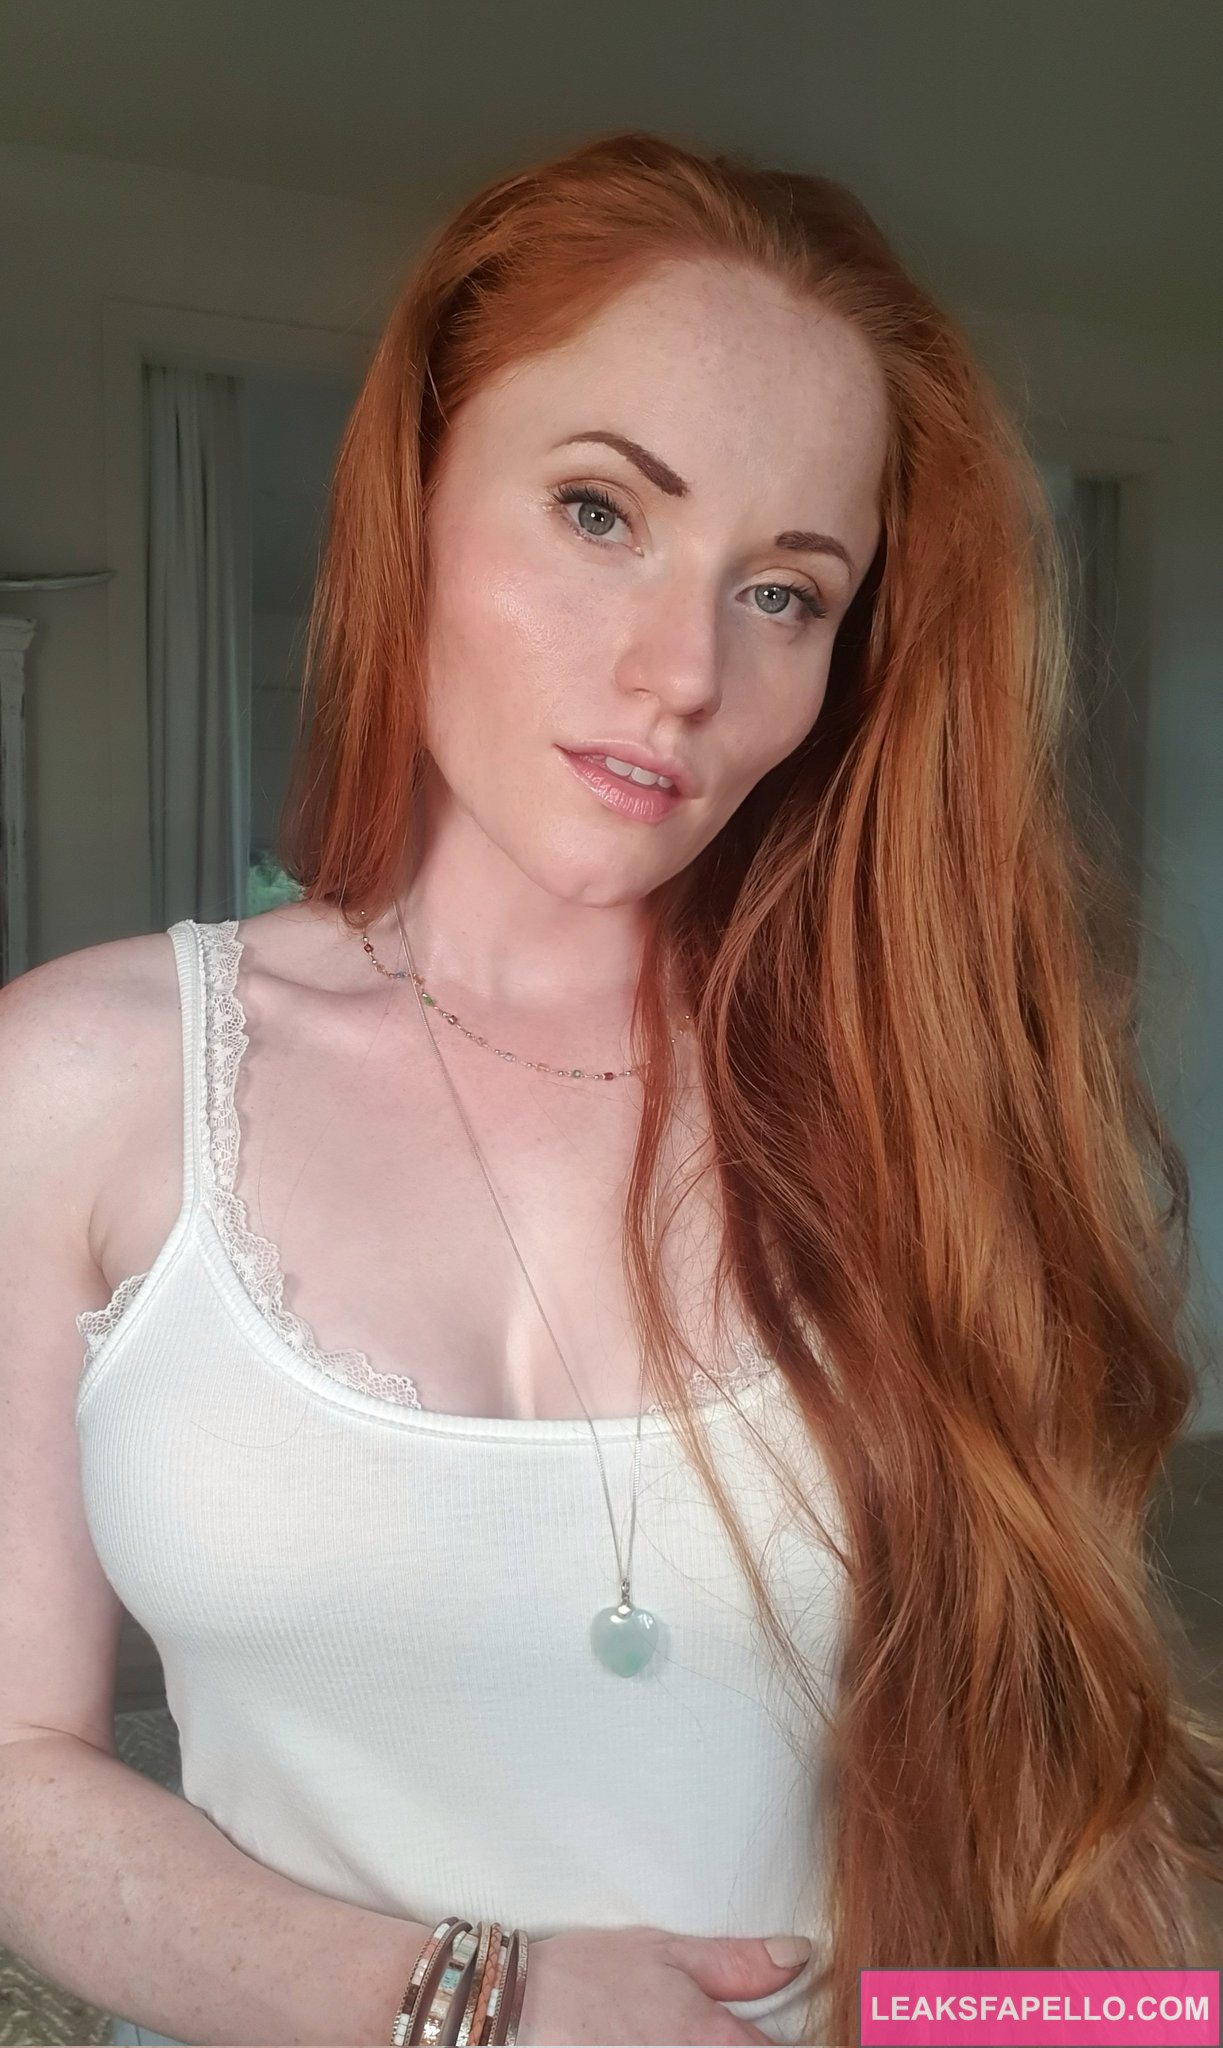 LoveAmyPond @loveamypond OnlyFans big tits redhead big tits thick ass hot sexy only fans model wearing white sexy top 